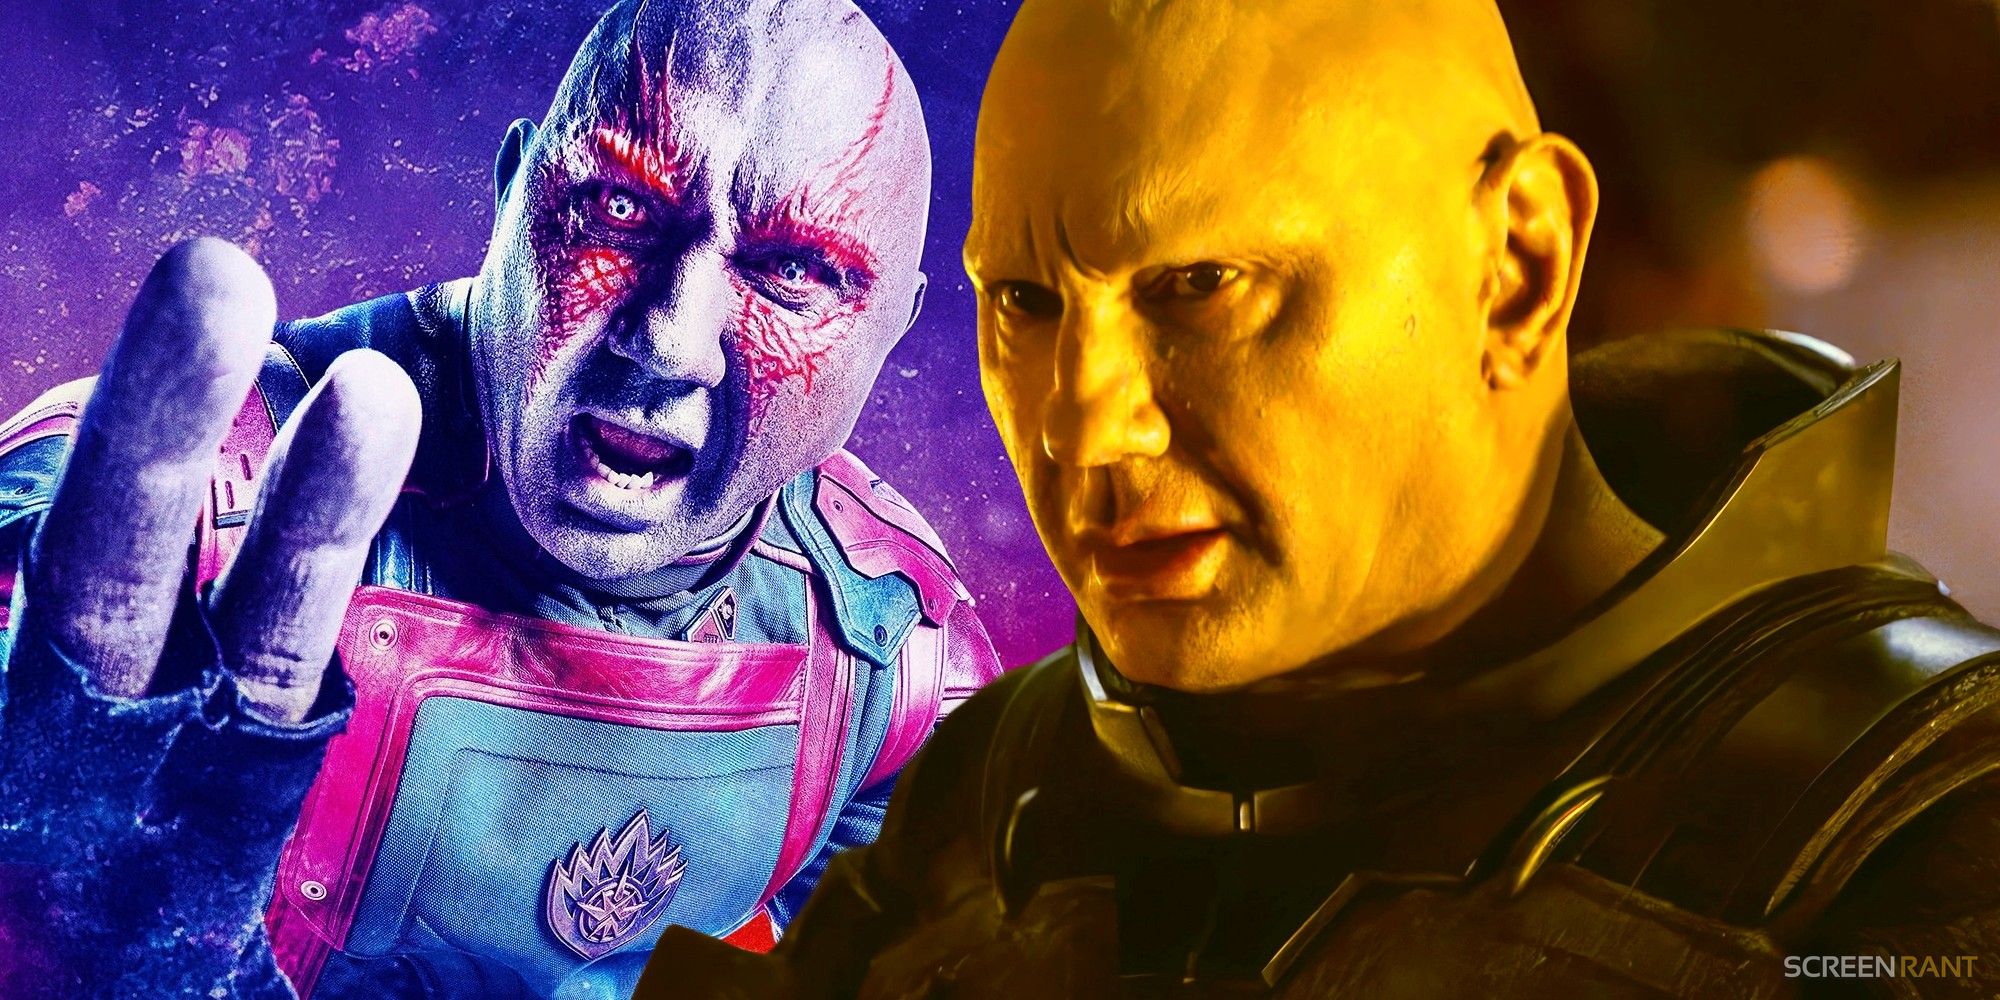 Dave Bautista as Drax in Guardians of the Galaxy 3 and Rabban in Dune: Part Two